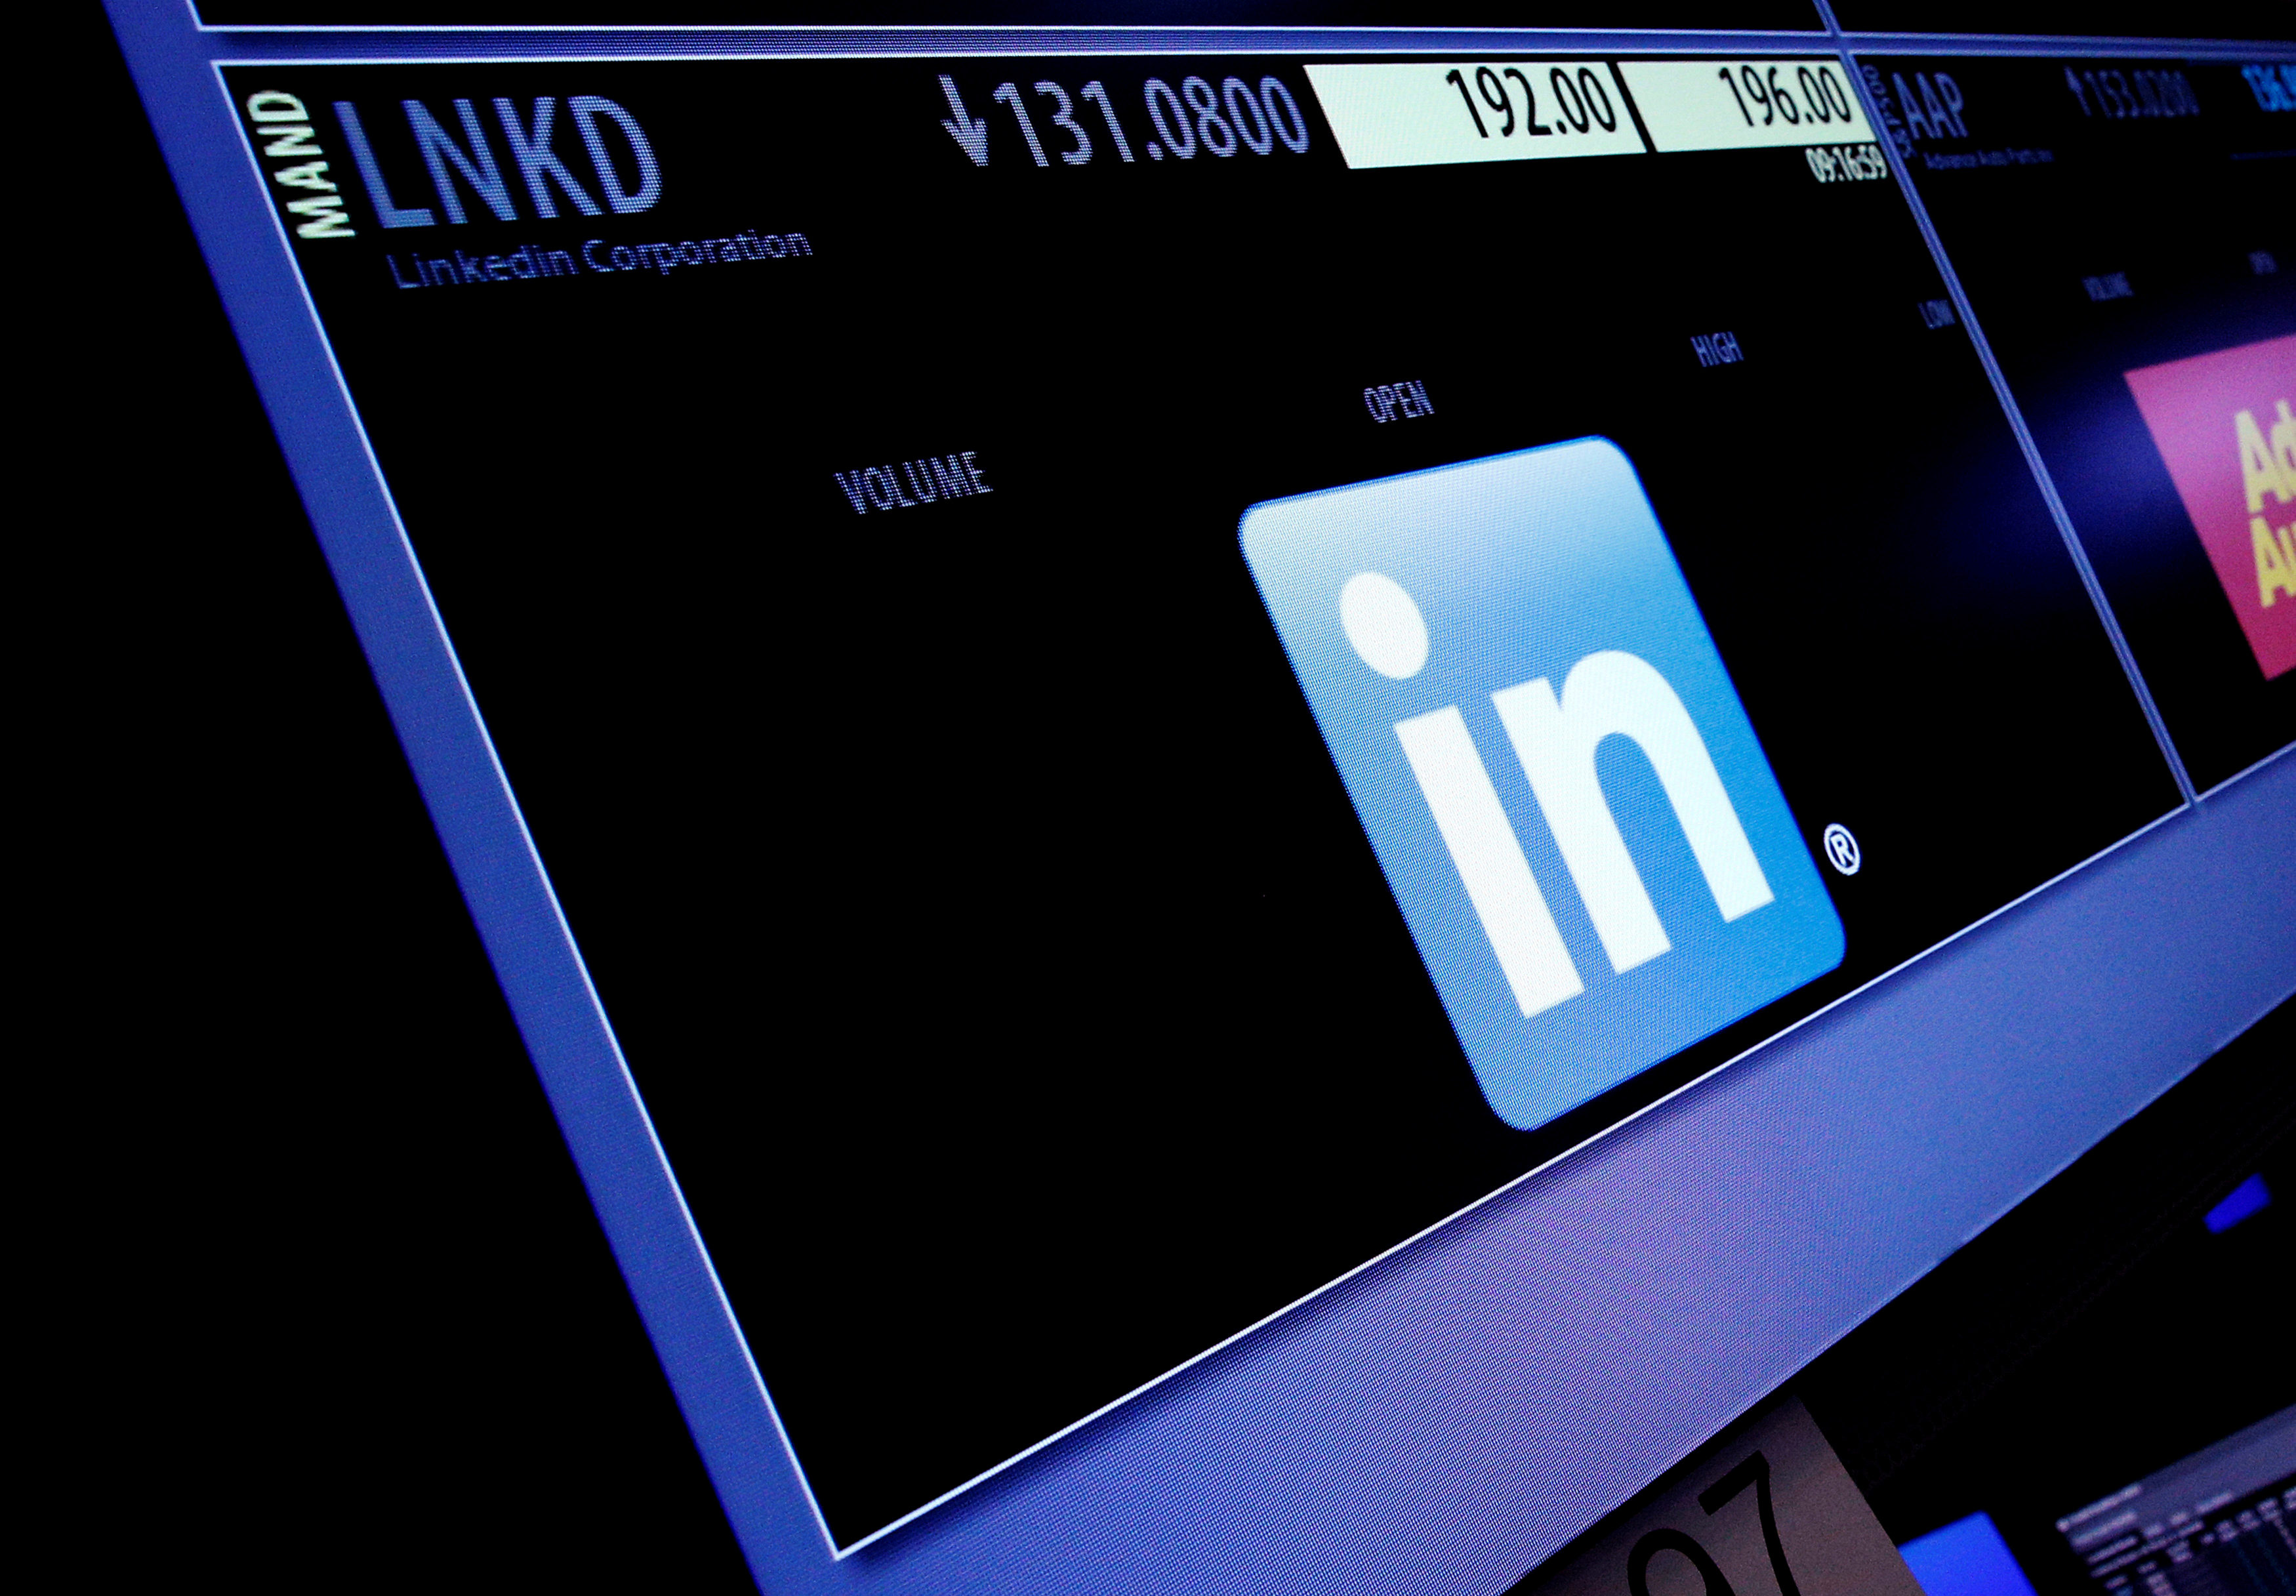 The ticker symbol and trading information for LinkedIn Corp. is displayed on a screen  at the post where it is traded, before the start of trading, on the floor of the New York Stock Exchange (NYSE) in New York City, U.S., June 13, 2016. REUTERS/Brendan McDermid